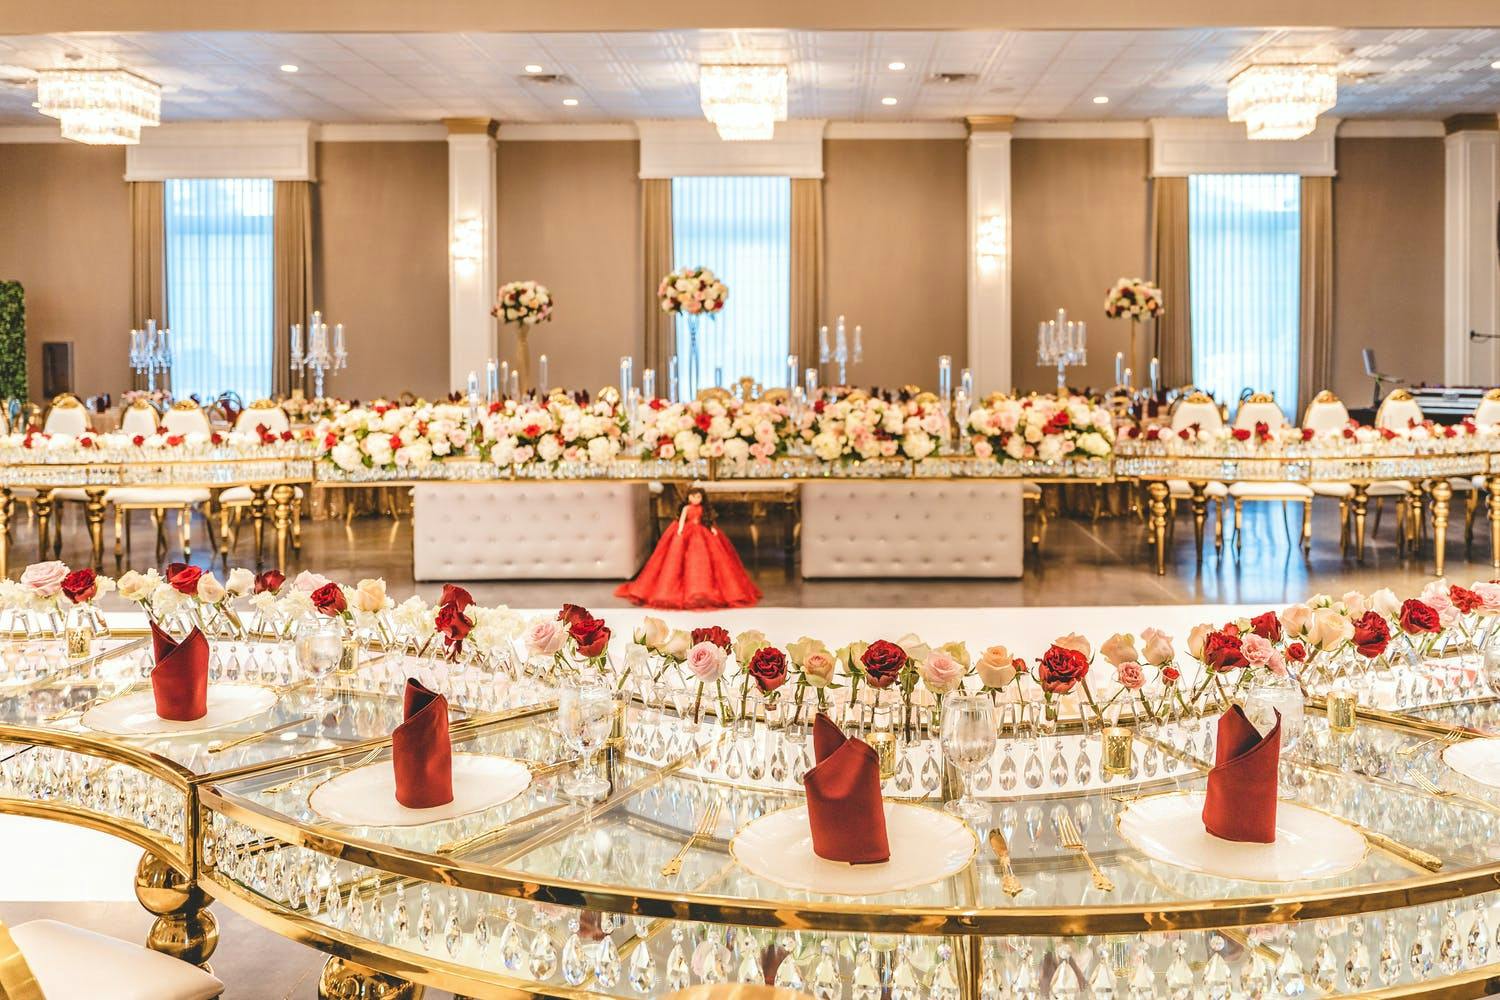 Paris theme quinceañera in red and gold colors | PartySlate